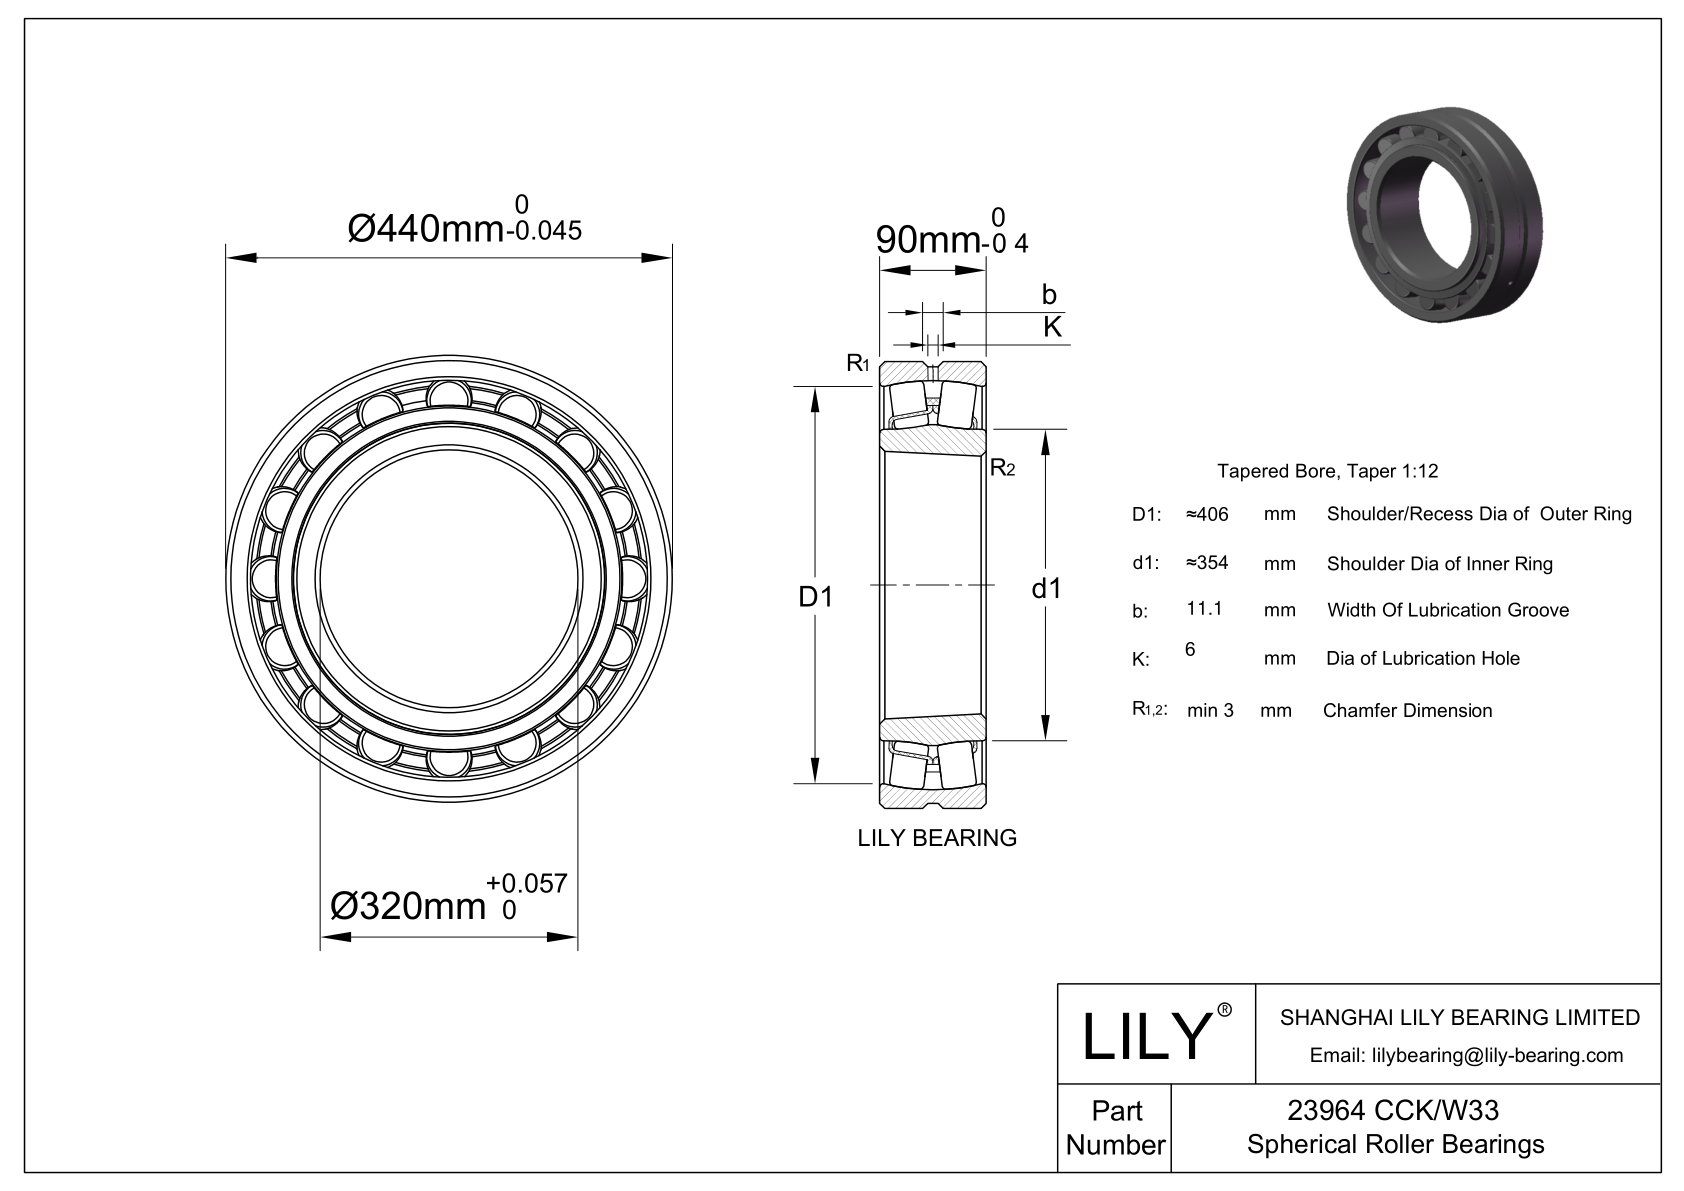 23964 CCK/W33 Double Row Spherical Roller Bearing cad drawing